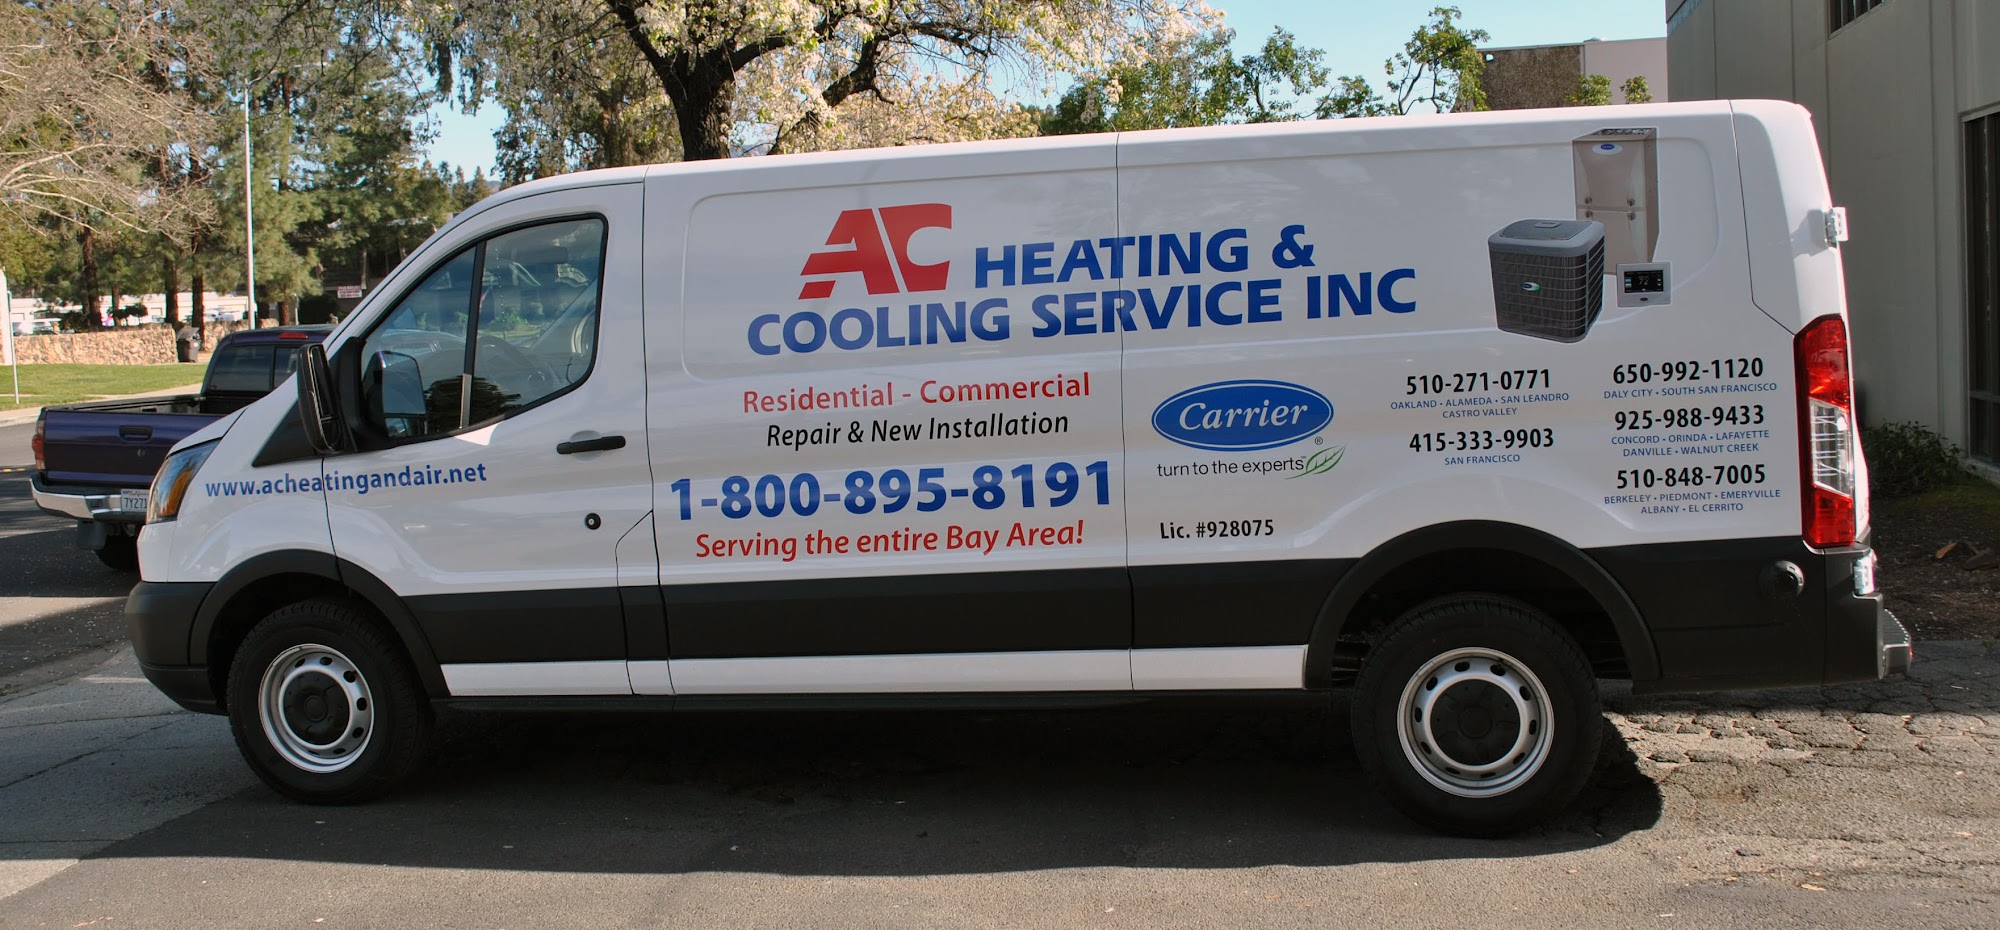 AC Heating & Cooling Services Inc